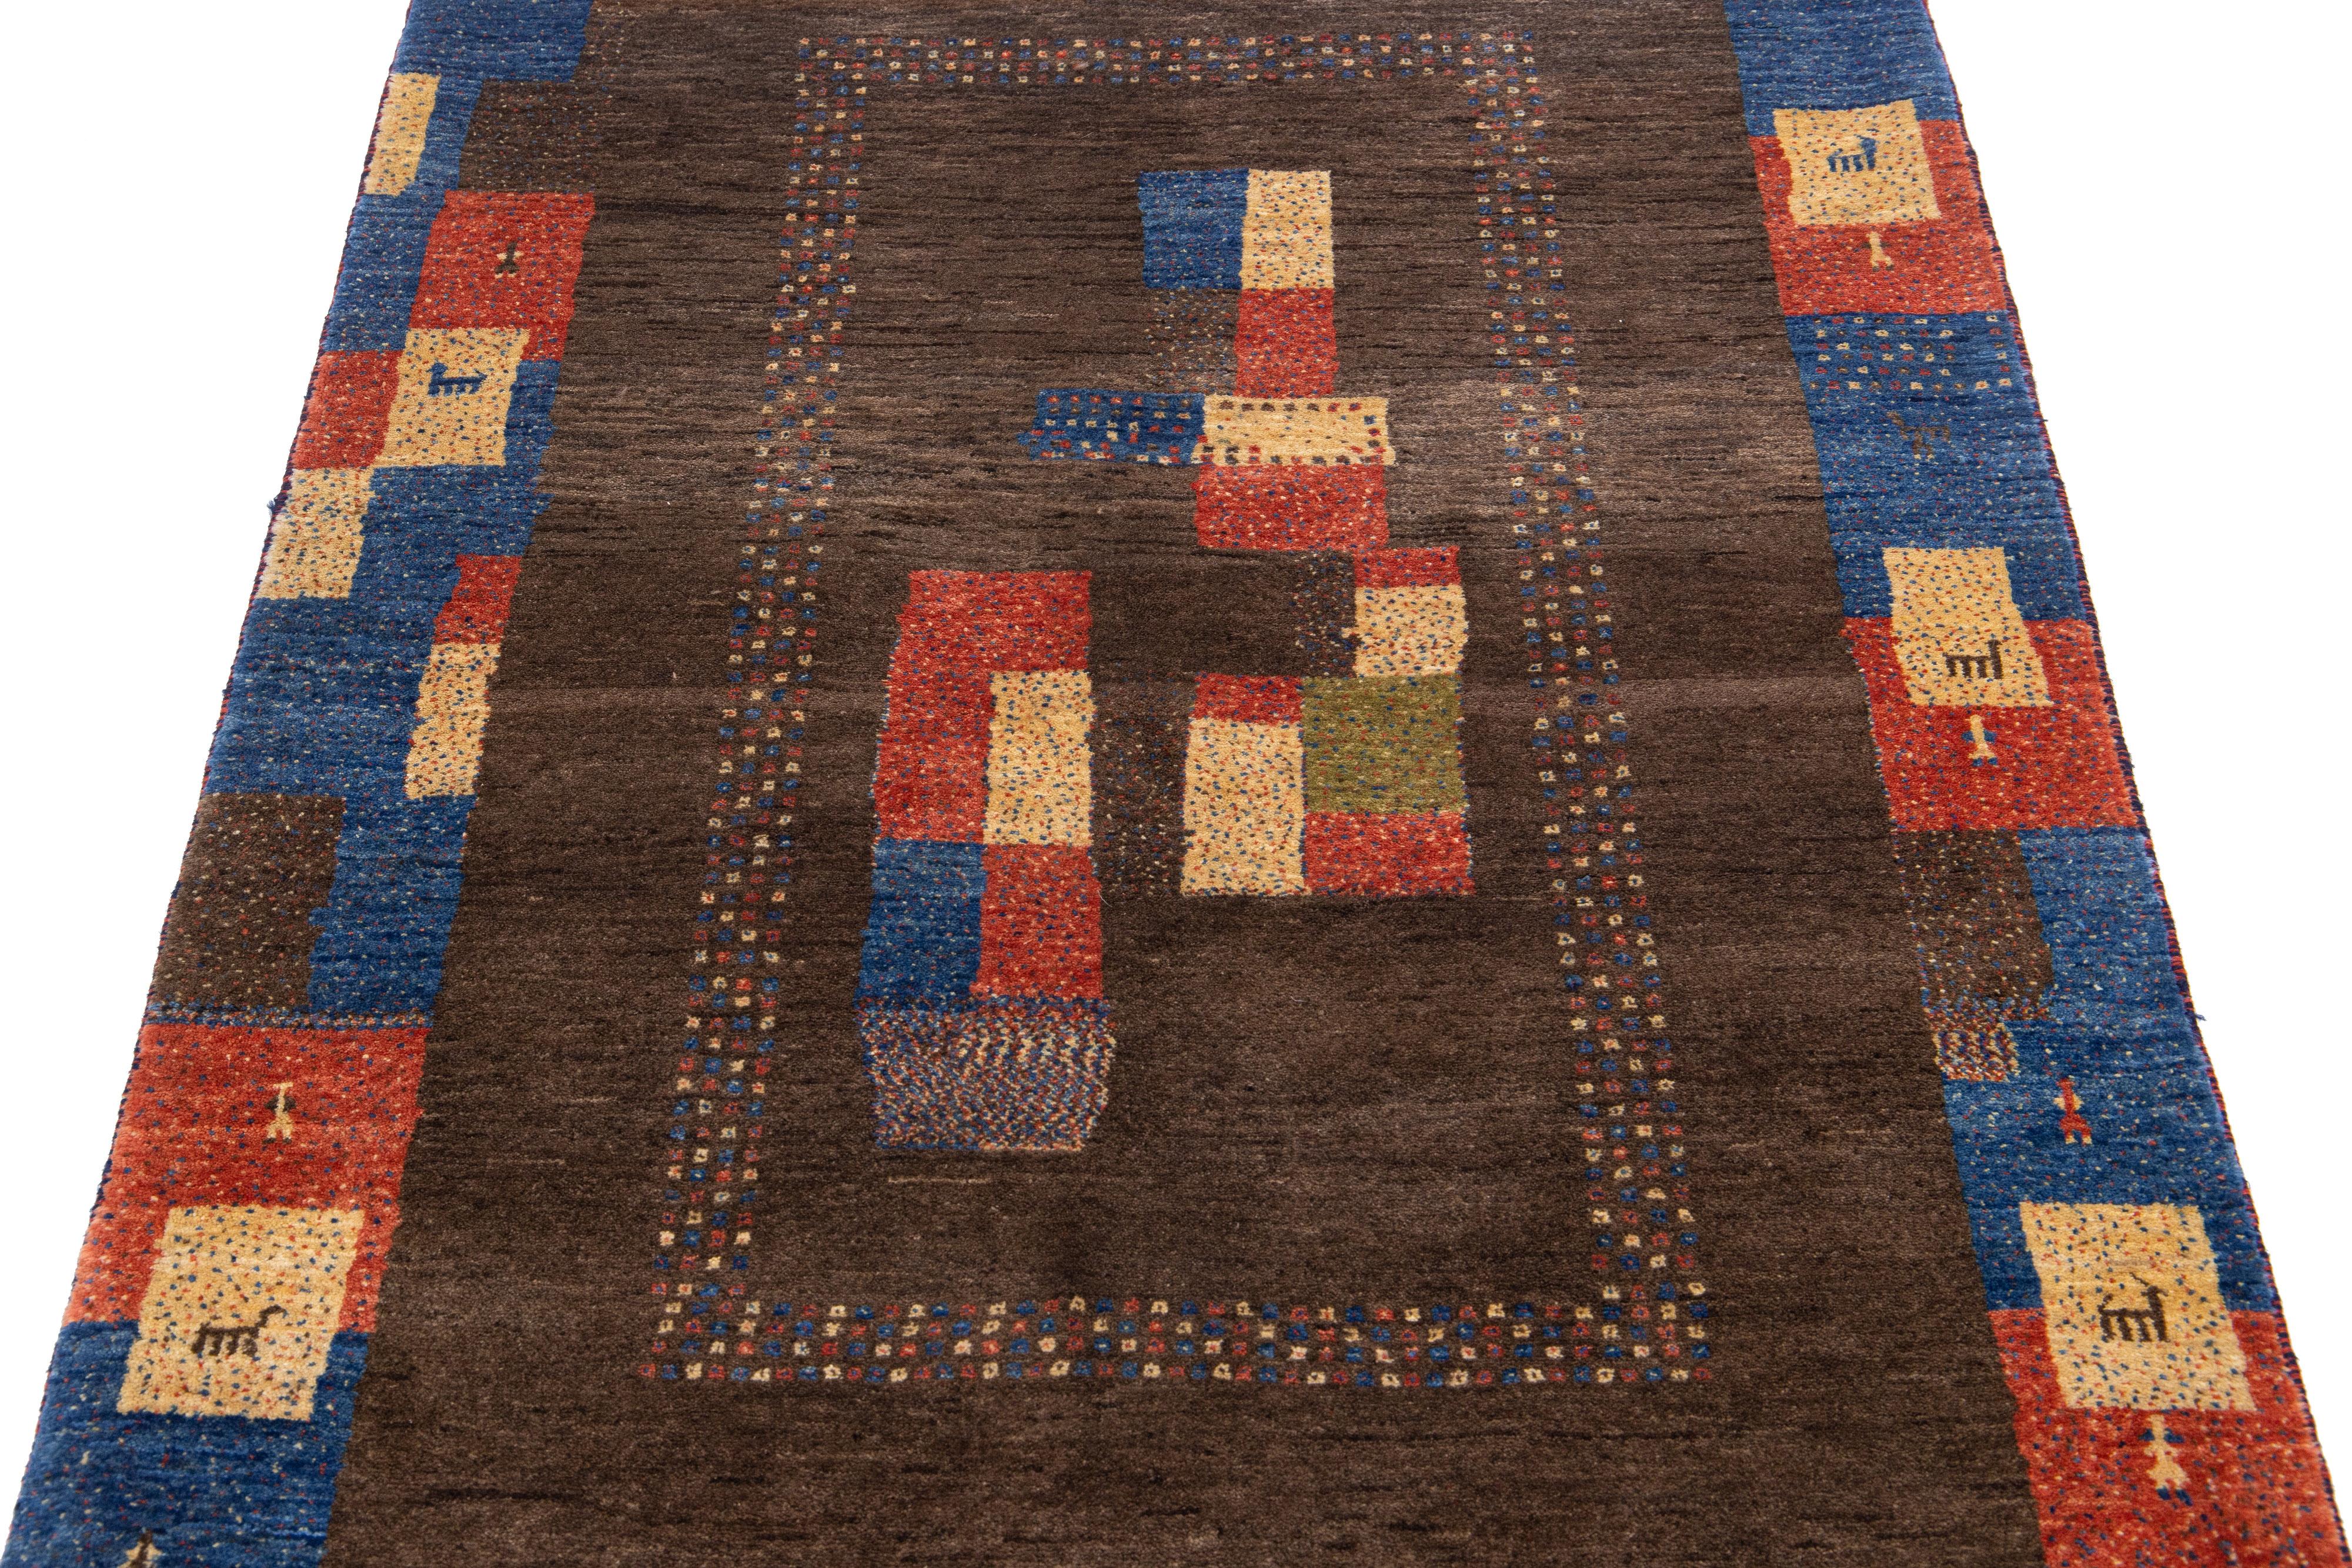 Beautiful modern Gabbeh-style hand-woven wool rug with a brown color field. This Persian rug has a gorgeously minimalist design with a navy blue frame and multicolor accents.

This rug measures: 3'6